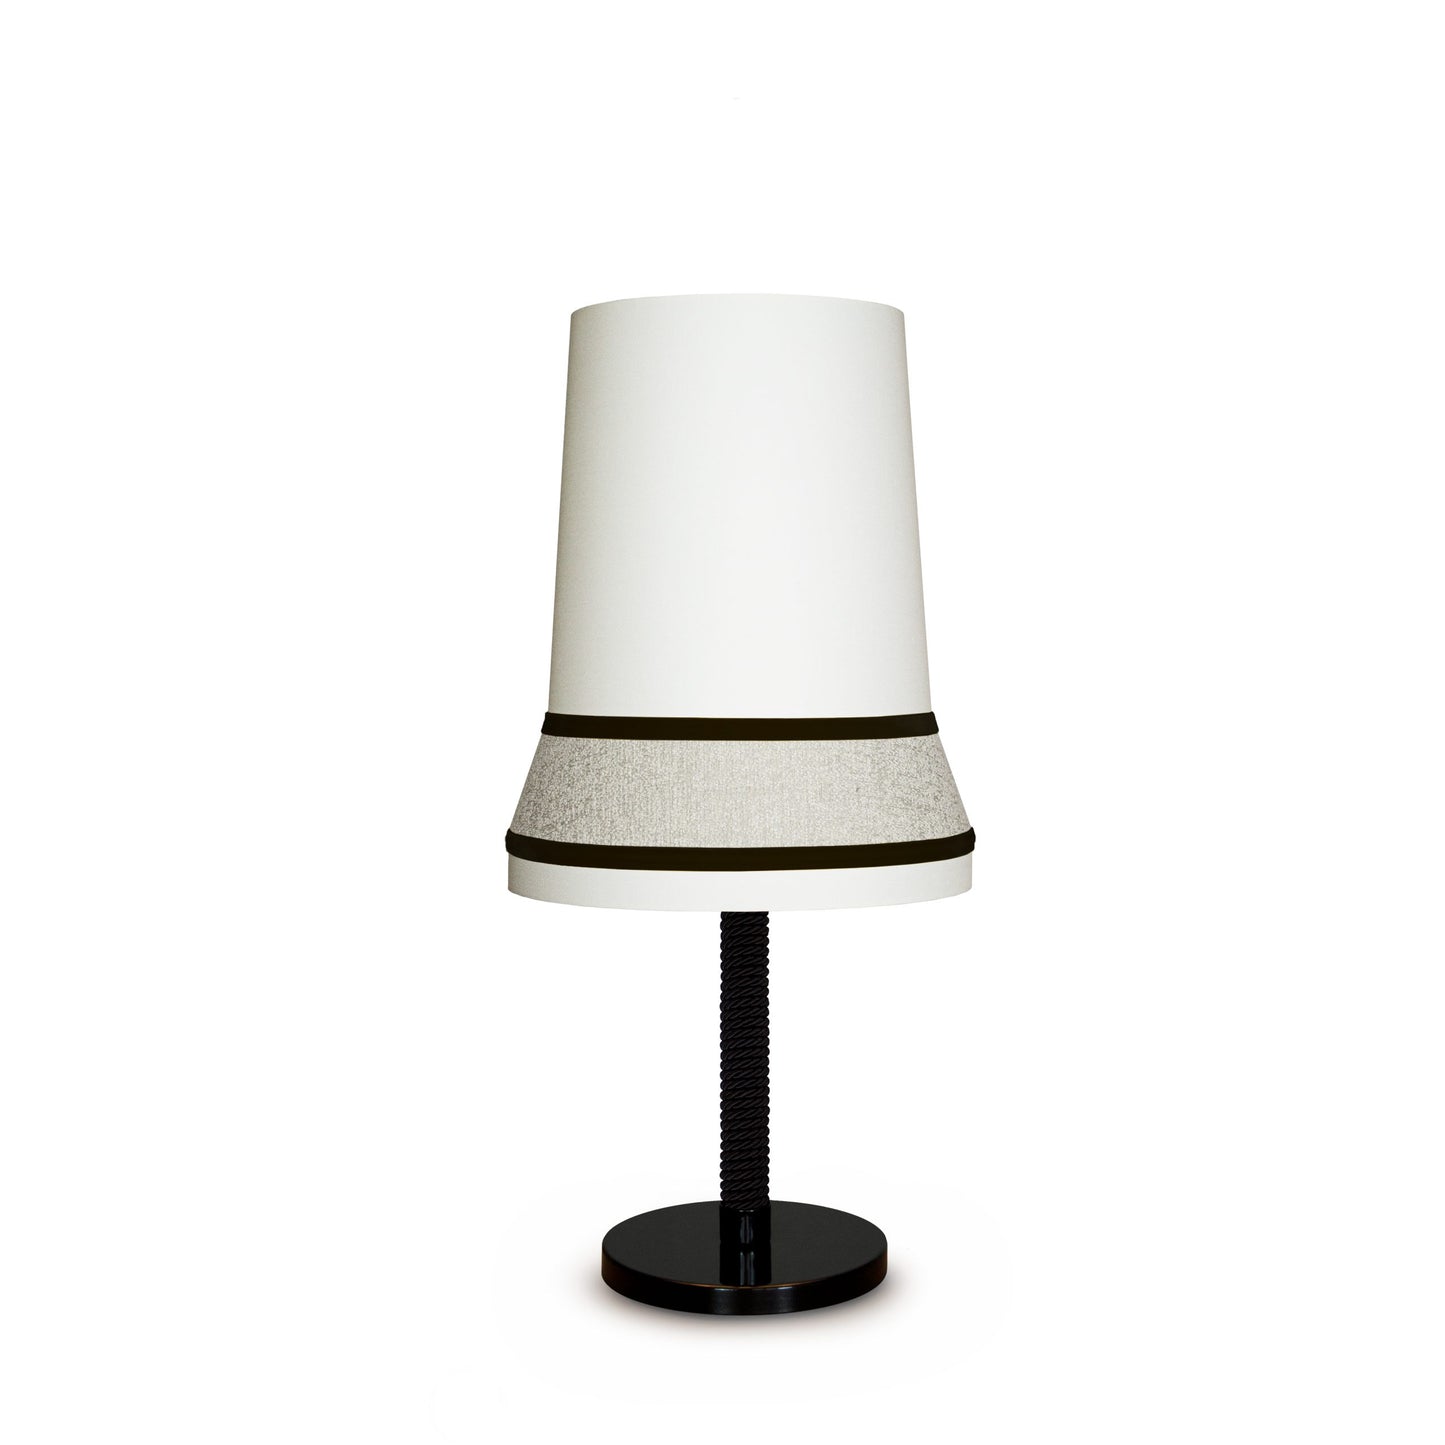 Fabric white Bedside lamps